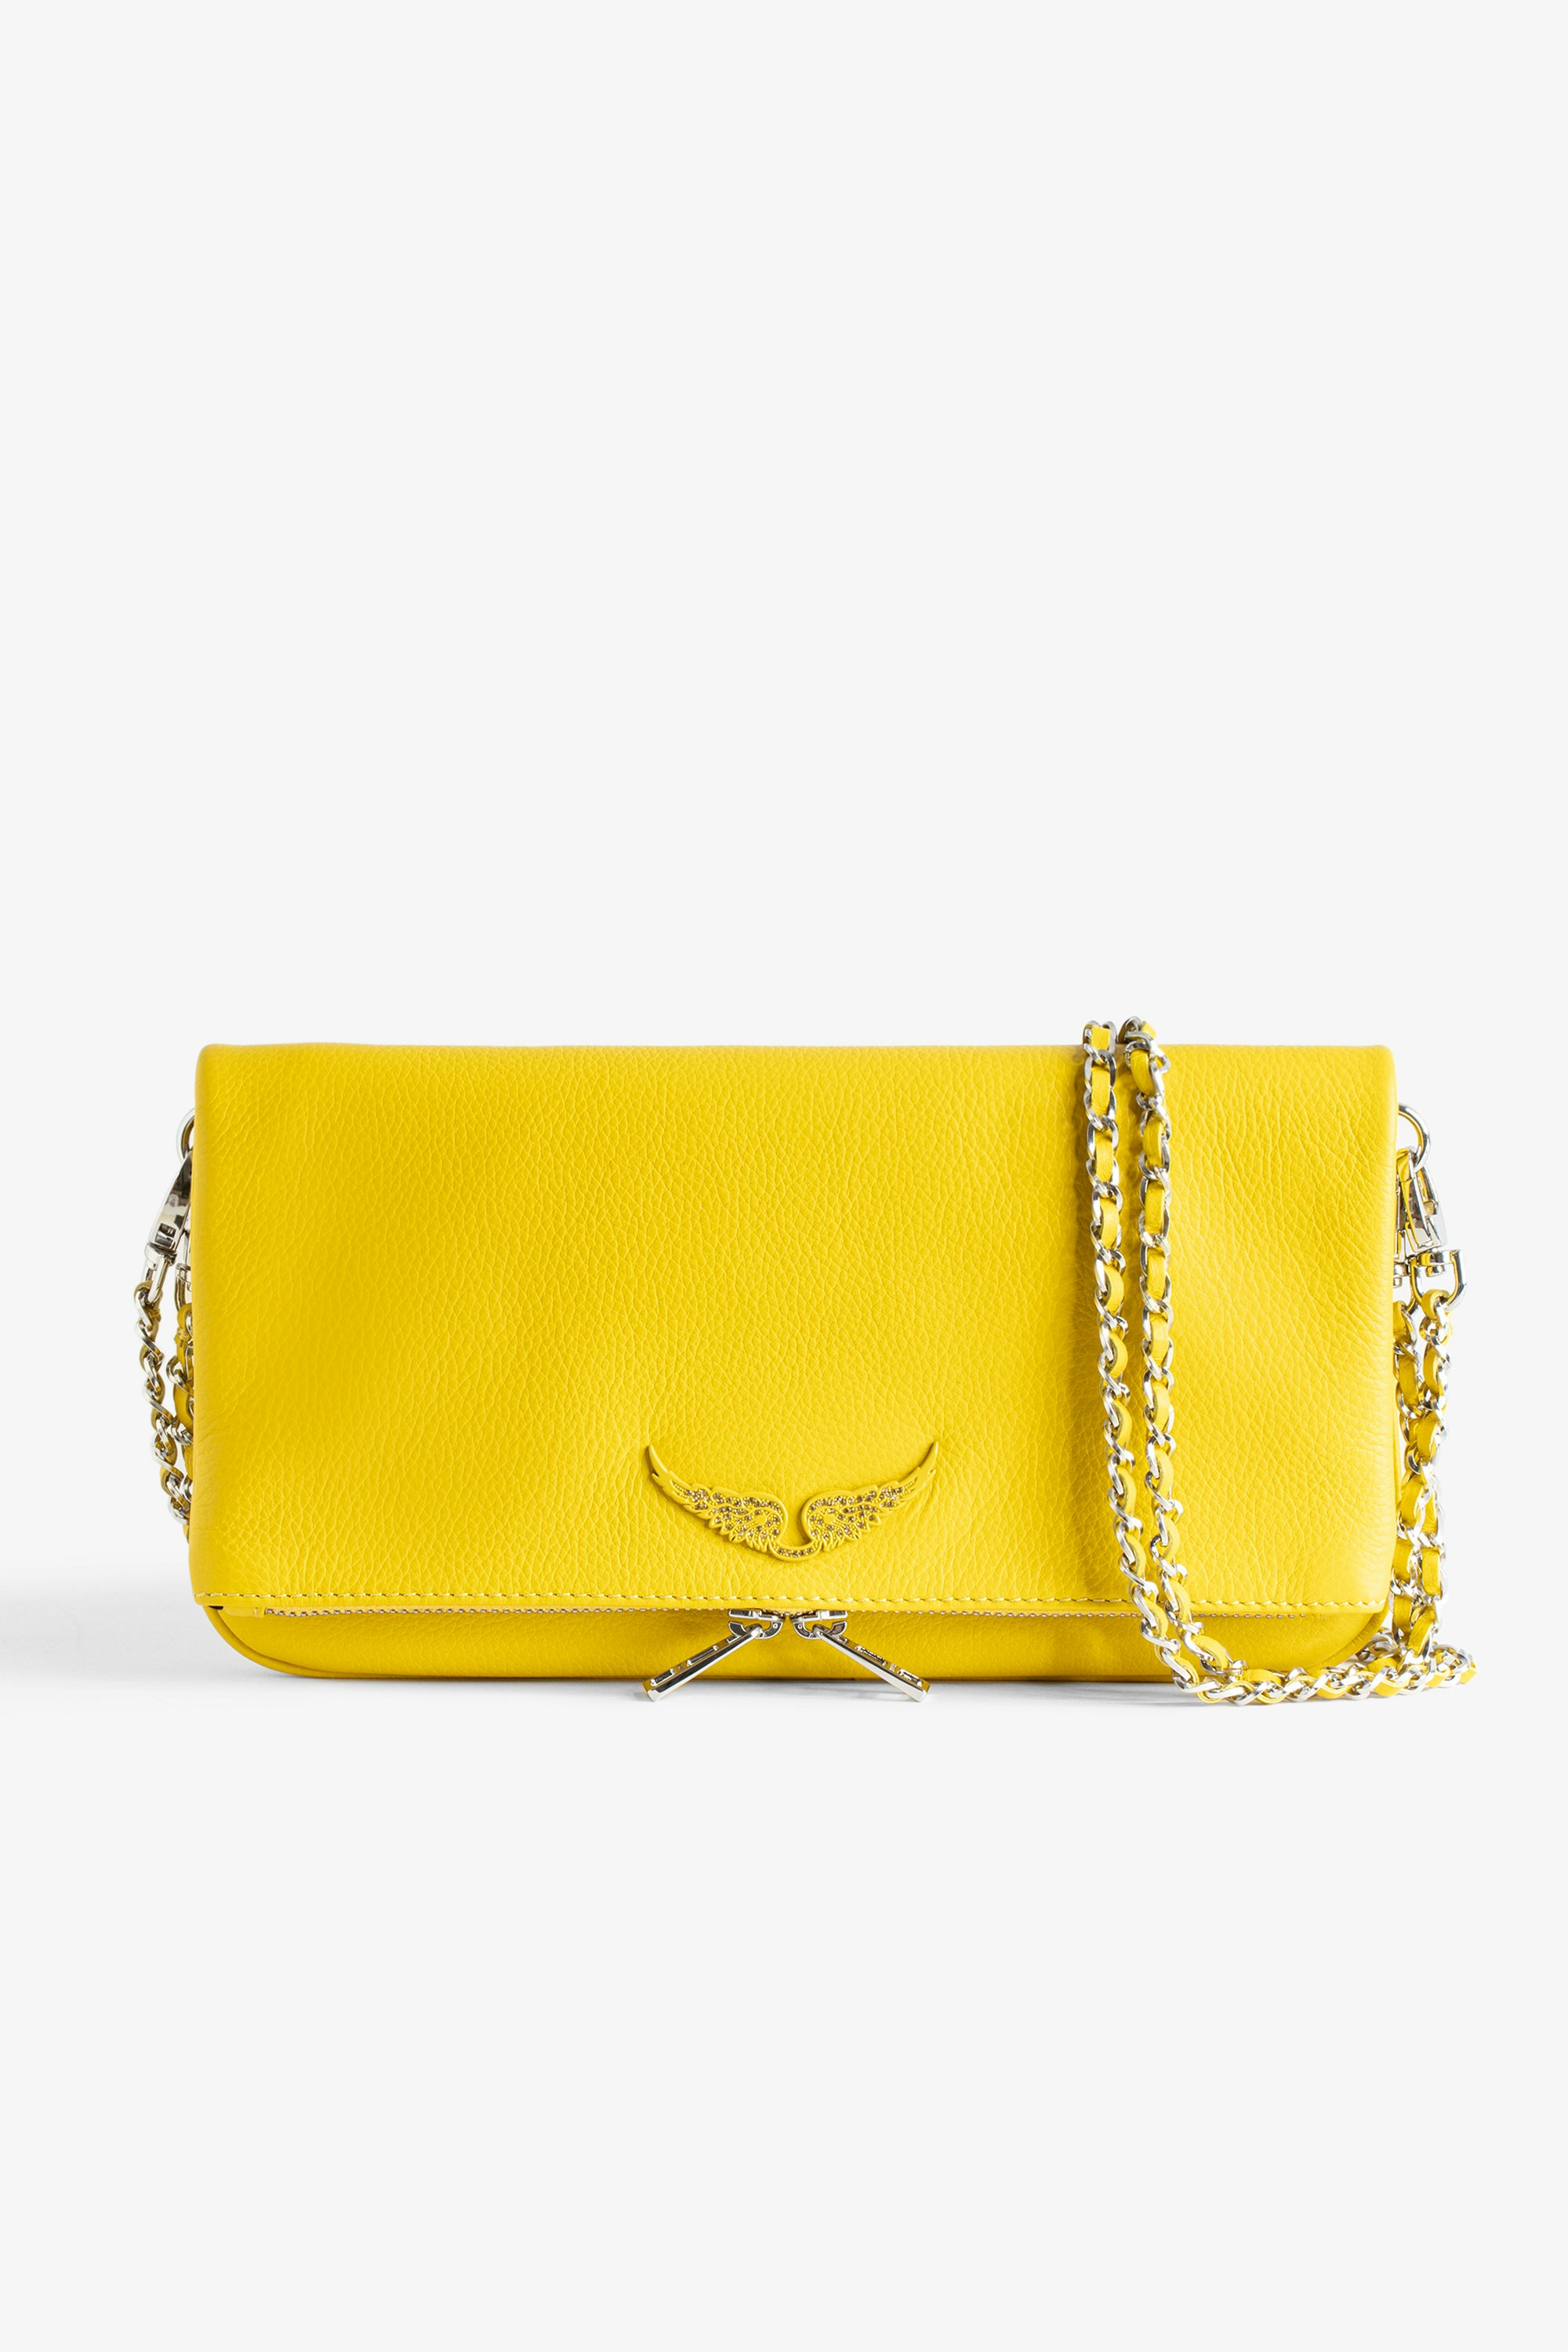 Rock Clutch Women’s yellow grained leather clutch with double leather and metal chain strap.